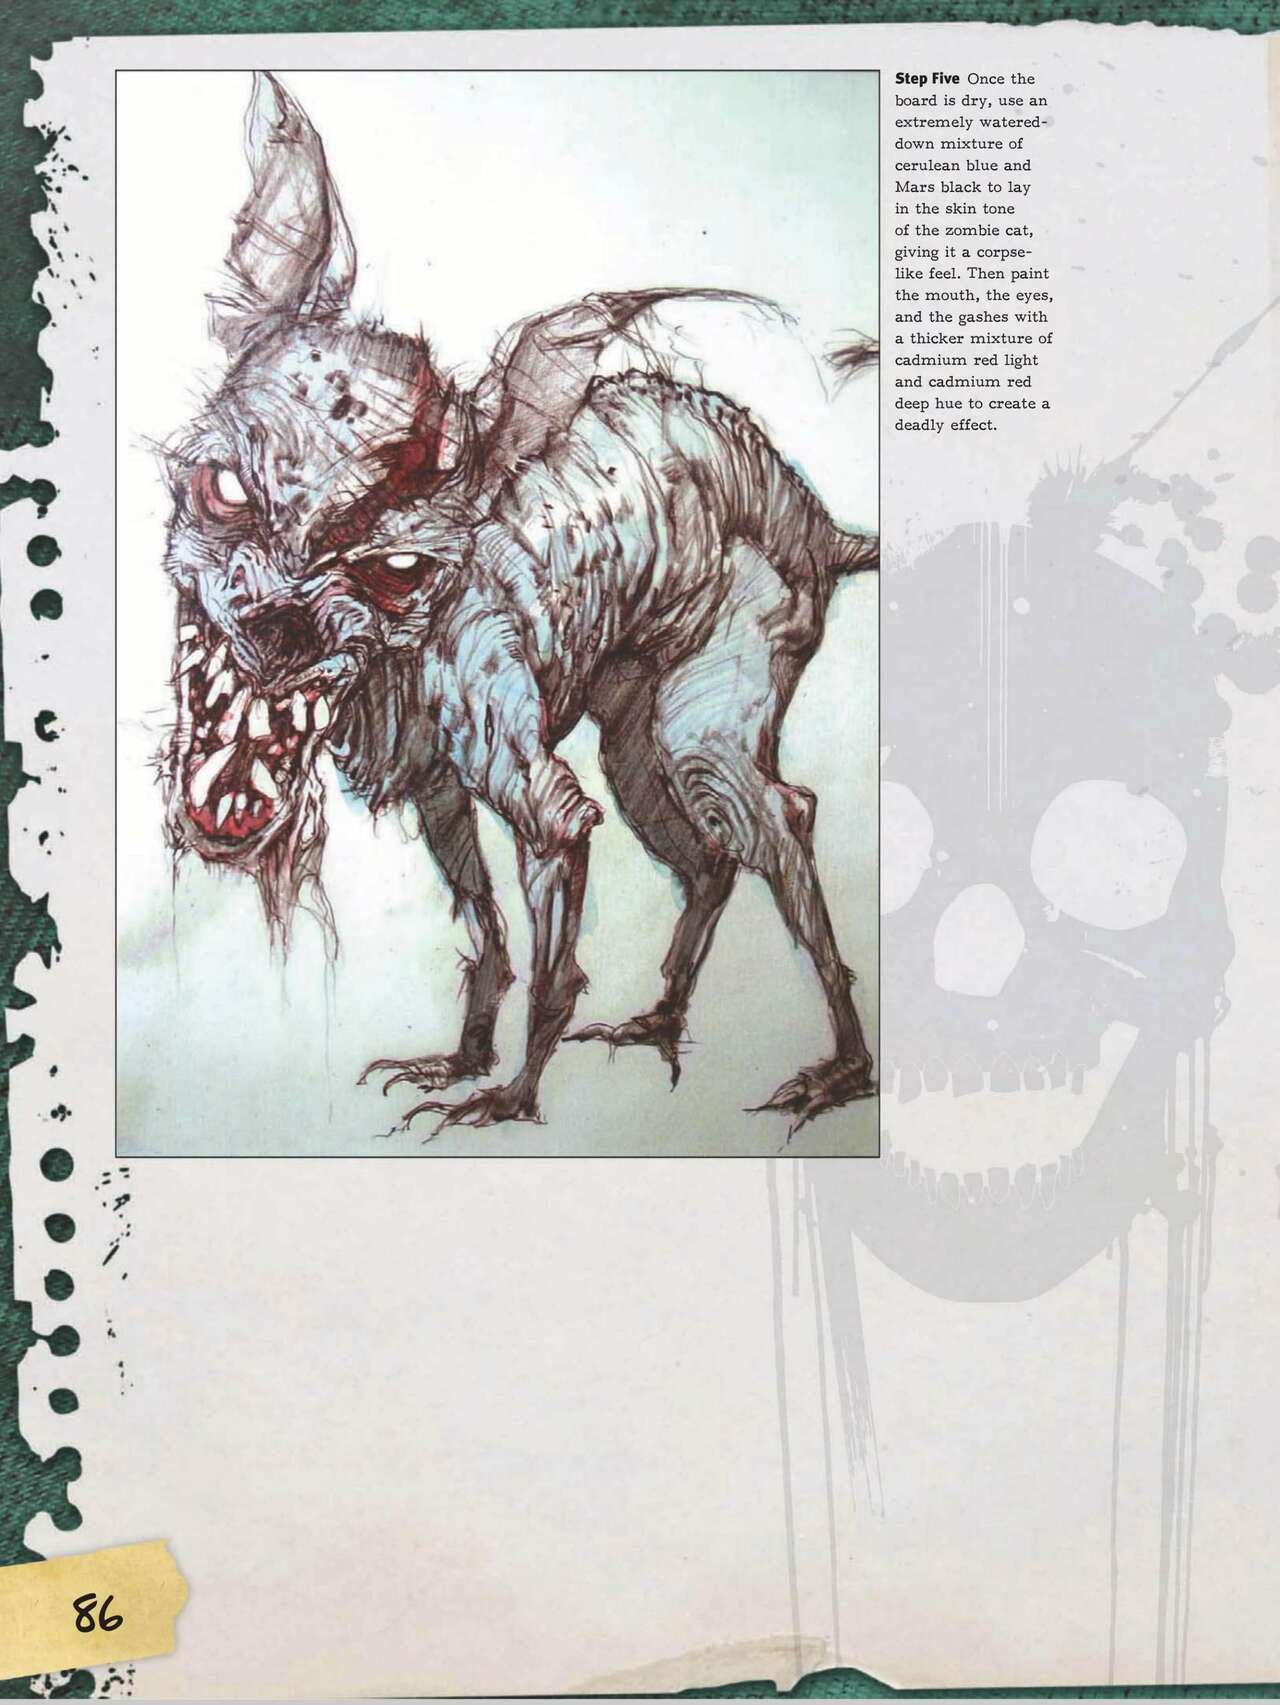 How to Draw Zombies: Discover the secrets to drawing, painting, and illustrating the undead 僵尸描绘集 87